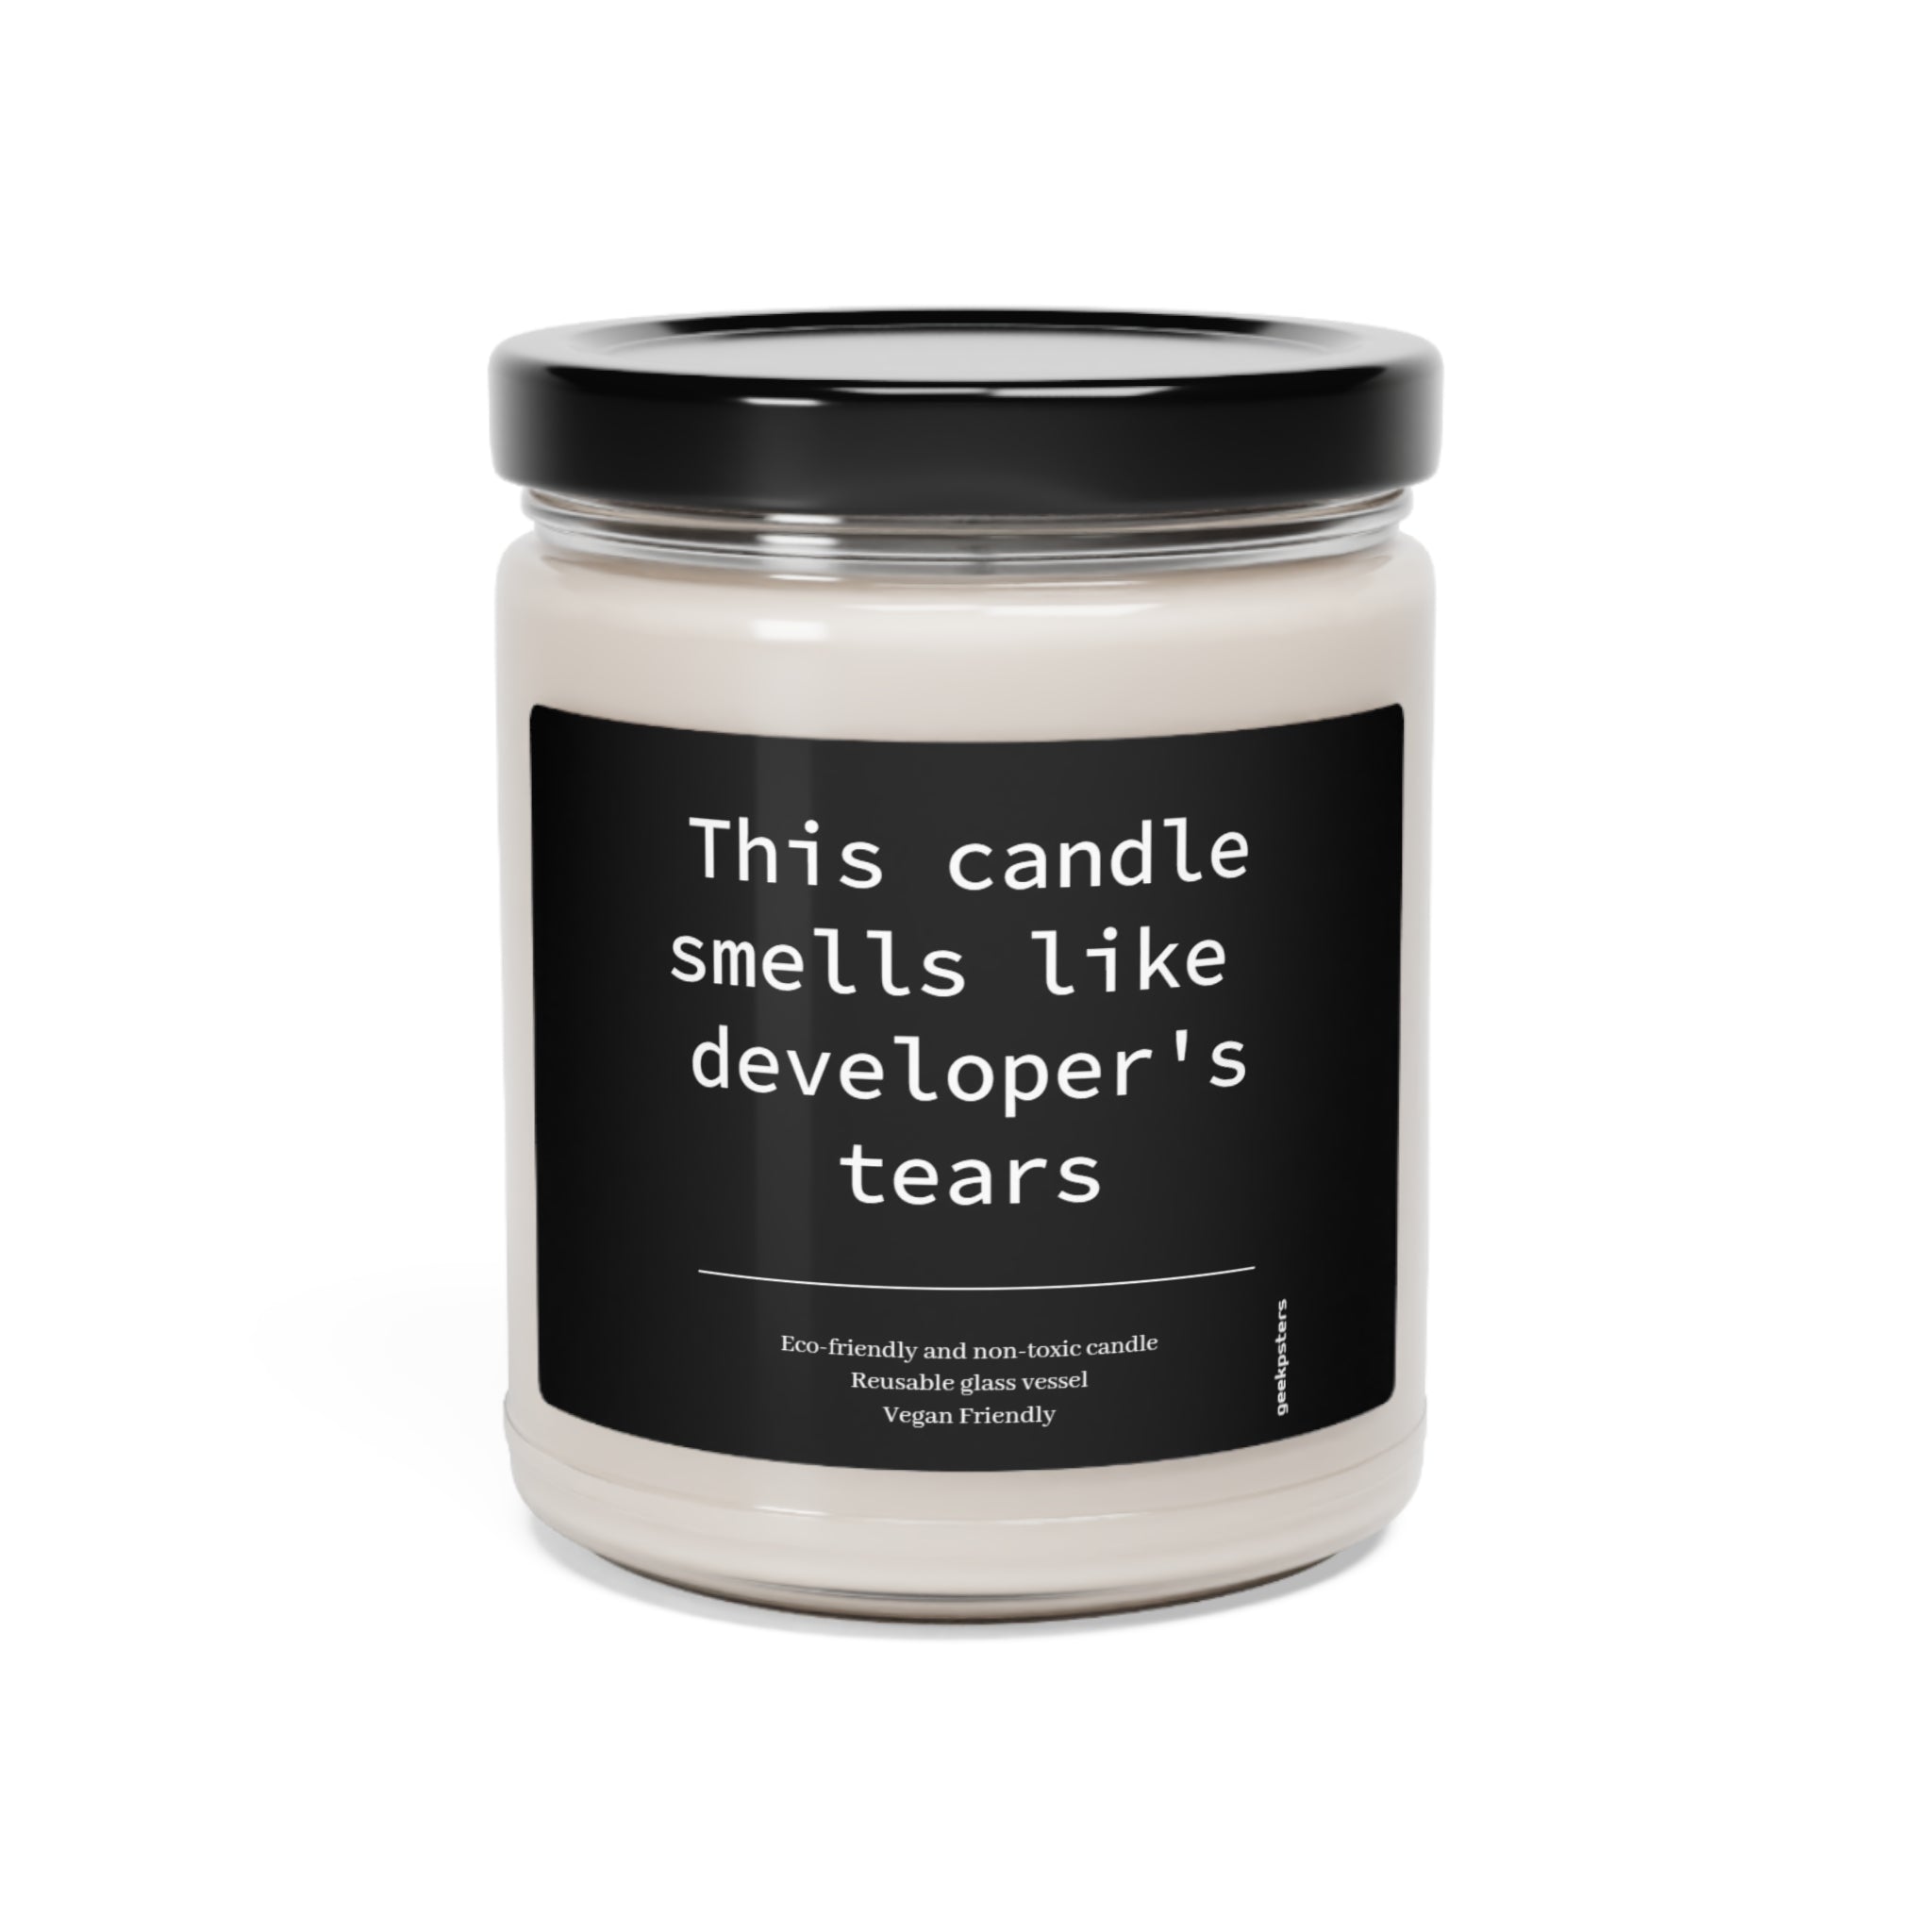 A This Candle Smells Like Developer's Tears- Scented Soy Candle, 9oz with the humorous label "this candle smells like developer's tears," indicating it's made from a soy wax blend, eco-friendly, and vegan-friendly.